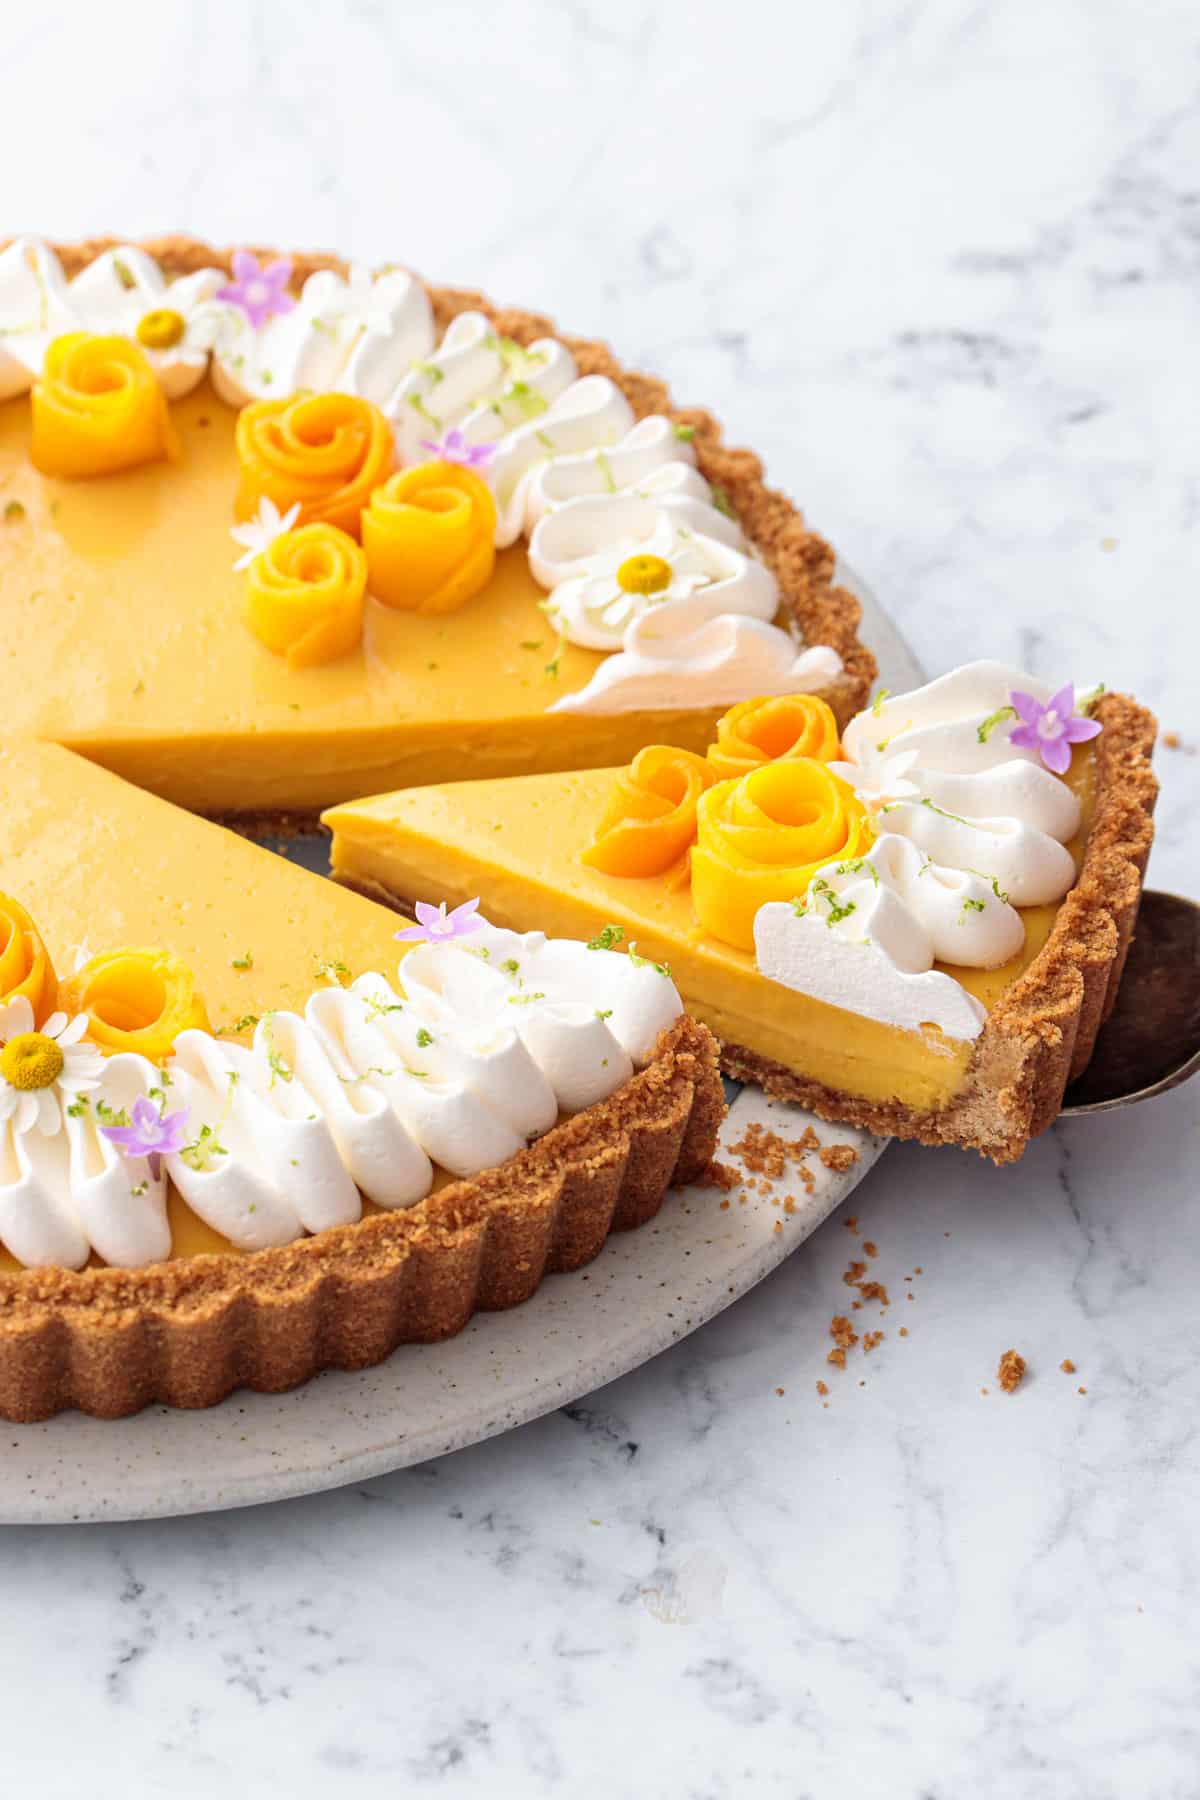 Slice of Mango Lime Tart showing the creamy texture and bright yellow color of the filling, decorated with whipped cream and edible flowers.